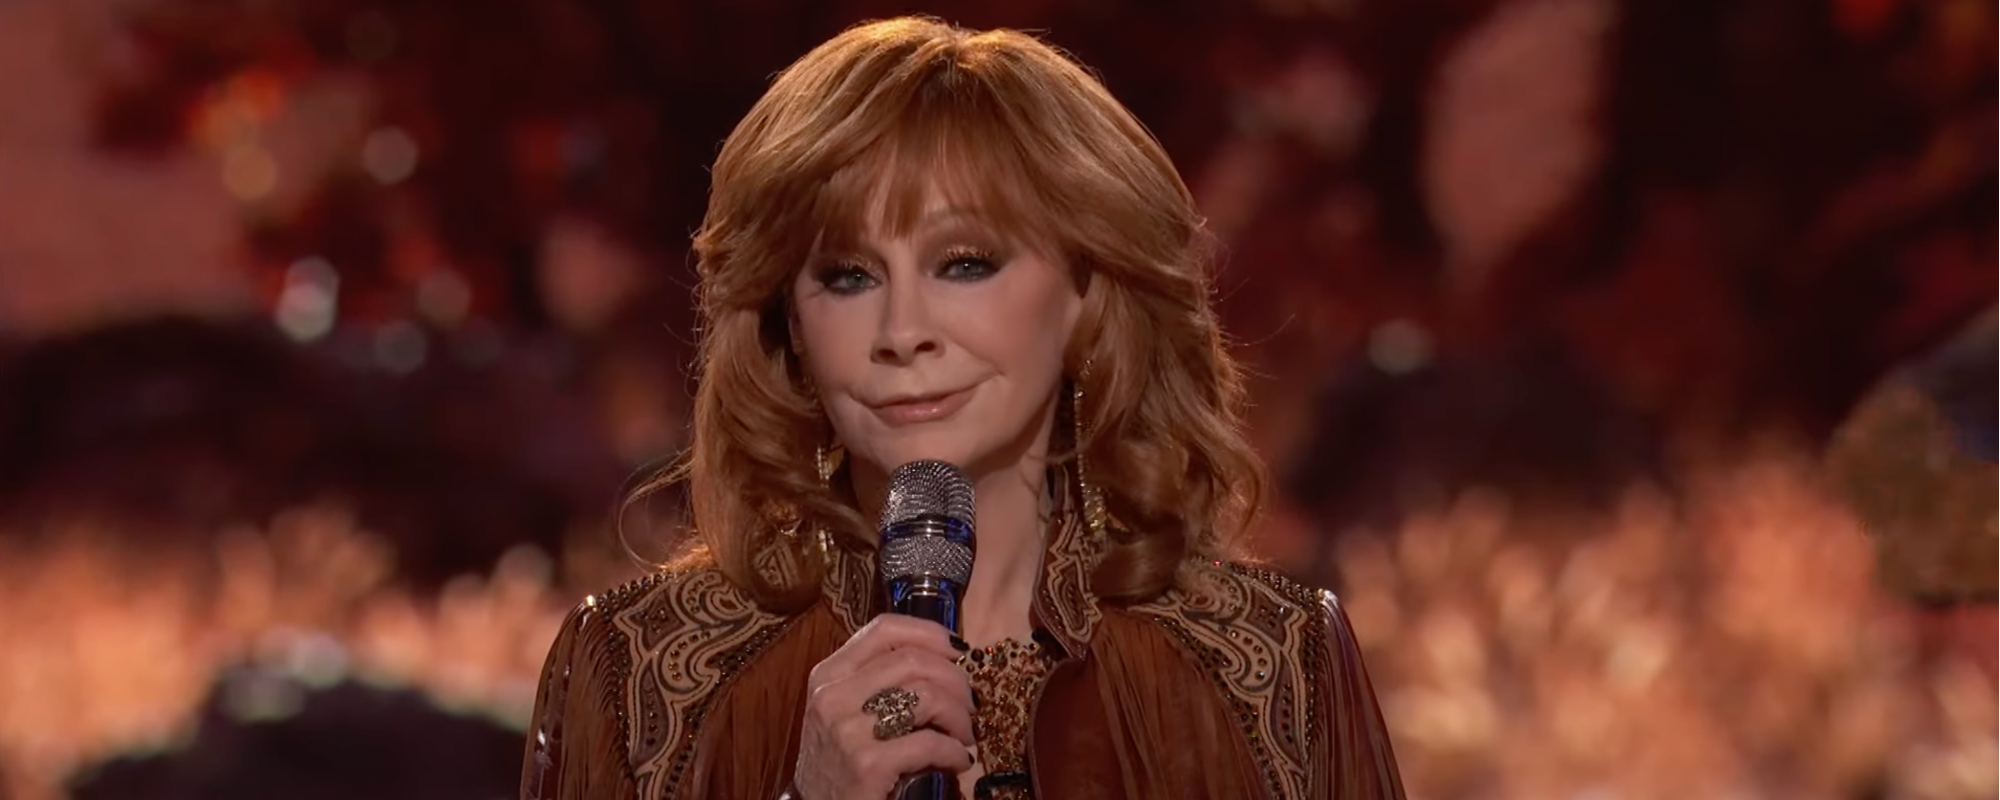 Reba McEntire Delivers Emotional Tribute to Late Mom With ‘The Voice’ Performance